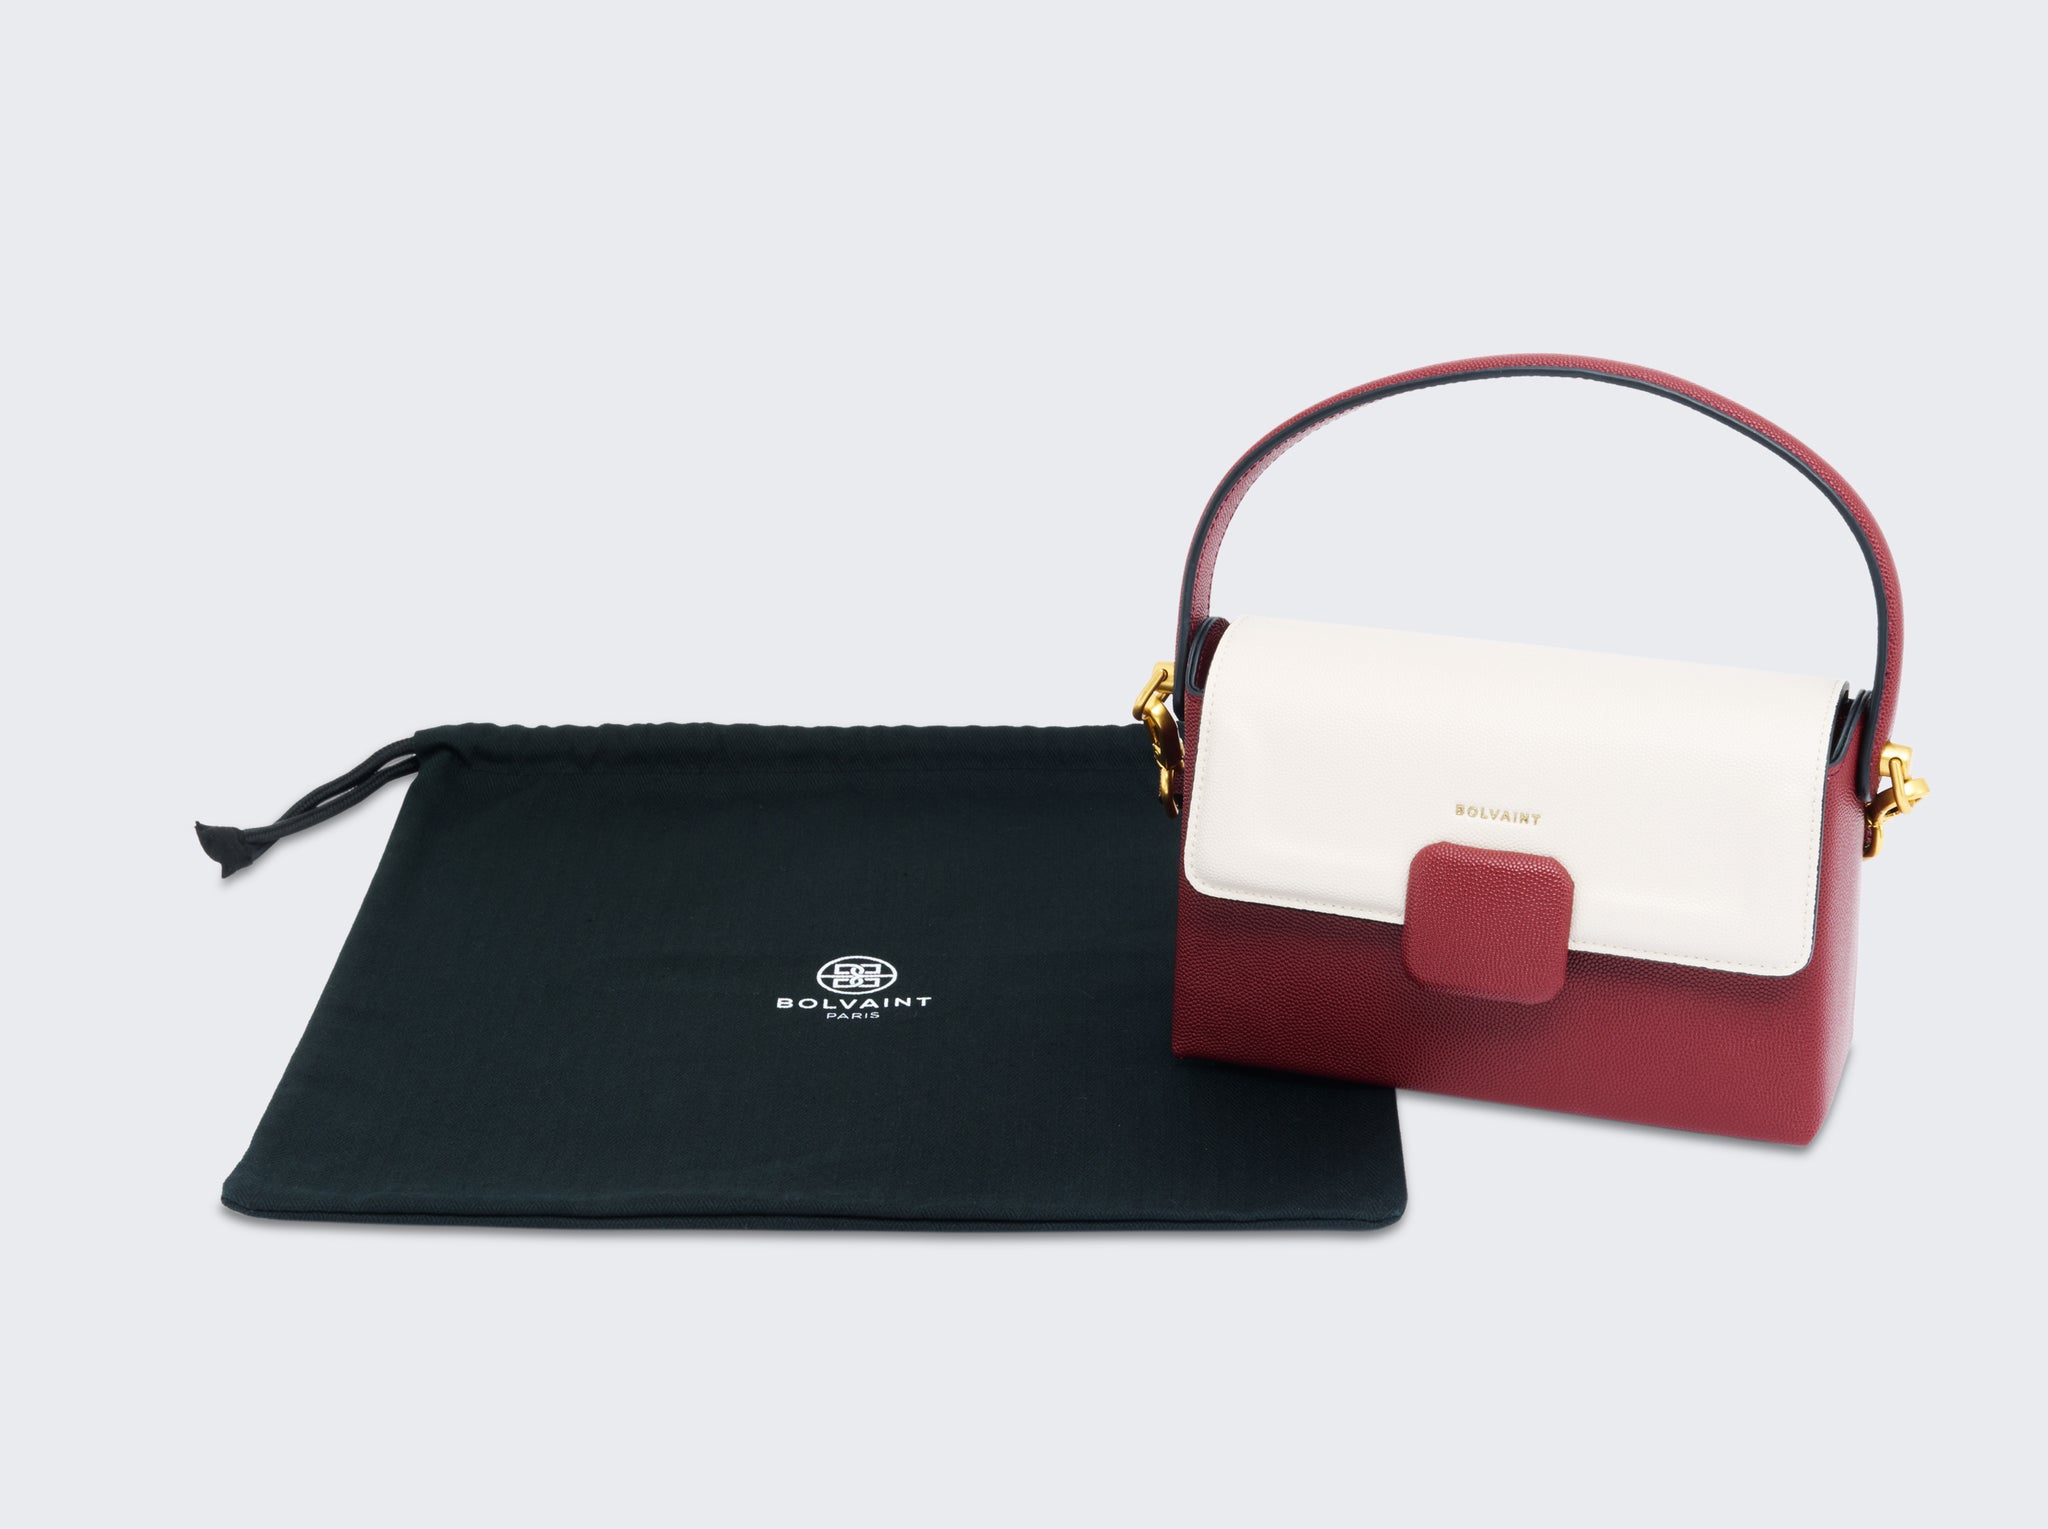 Bolvaint - The Marianne Clutch